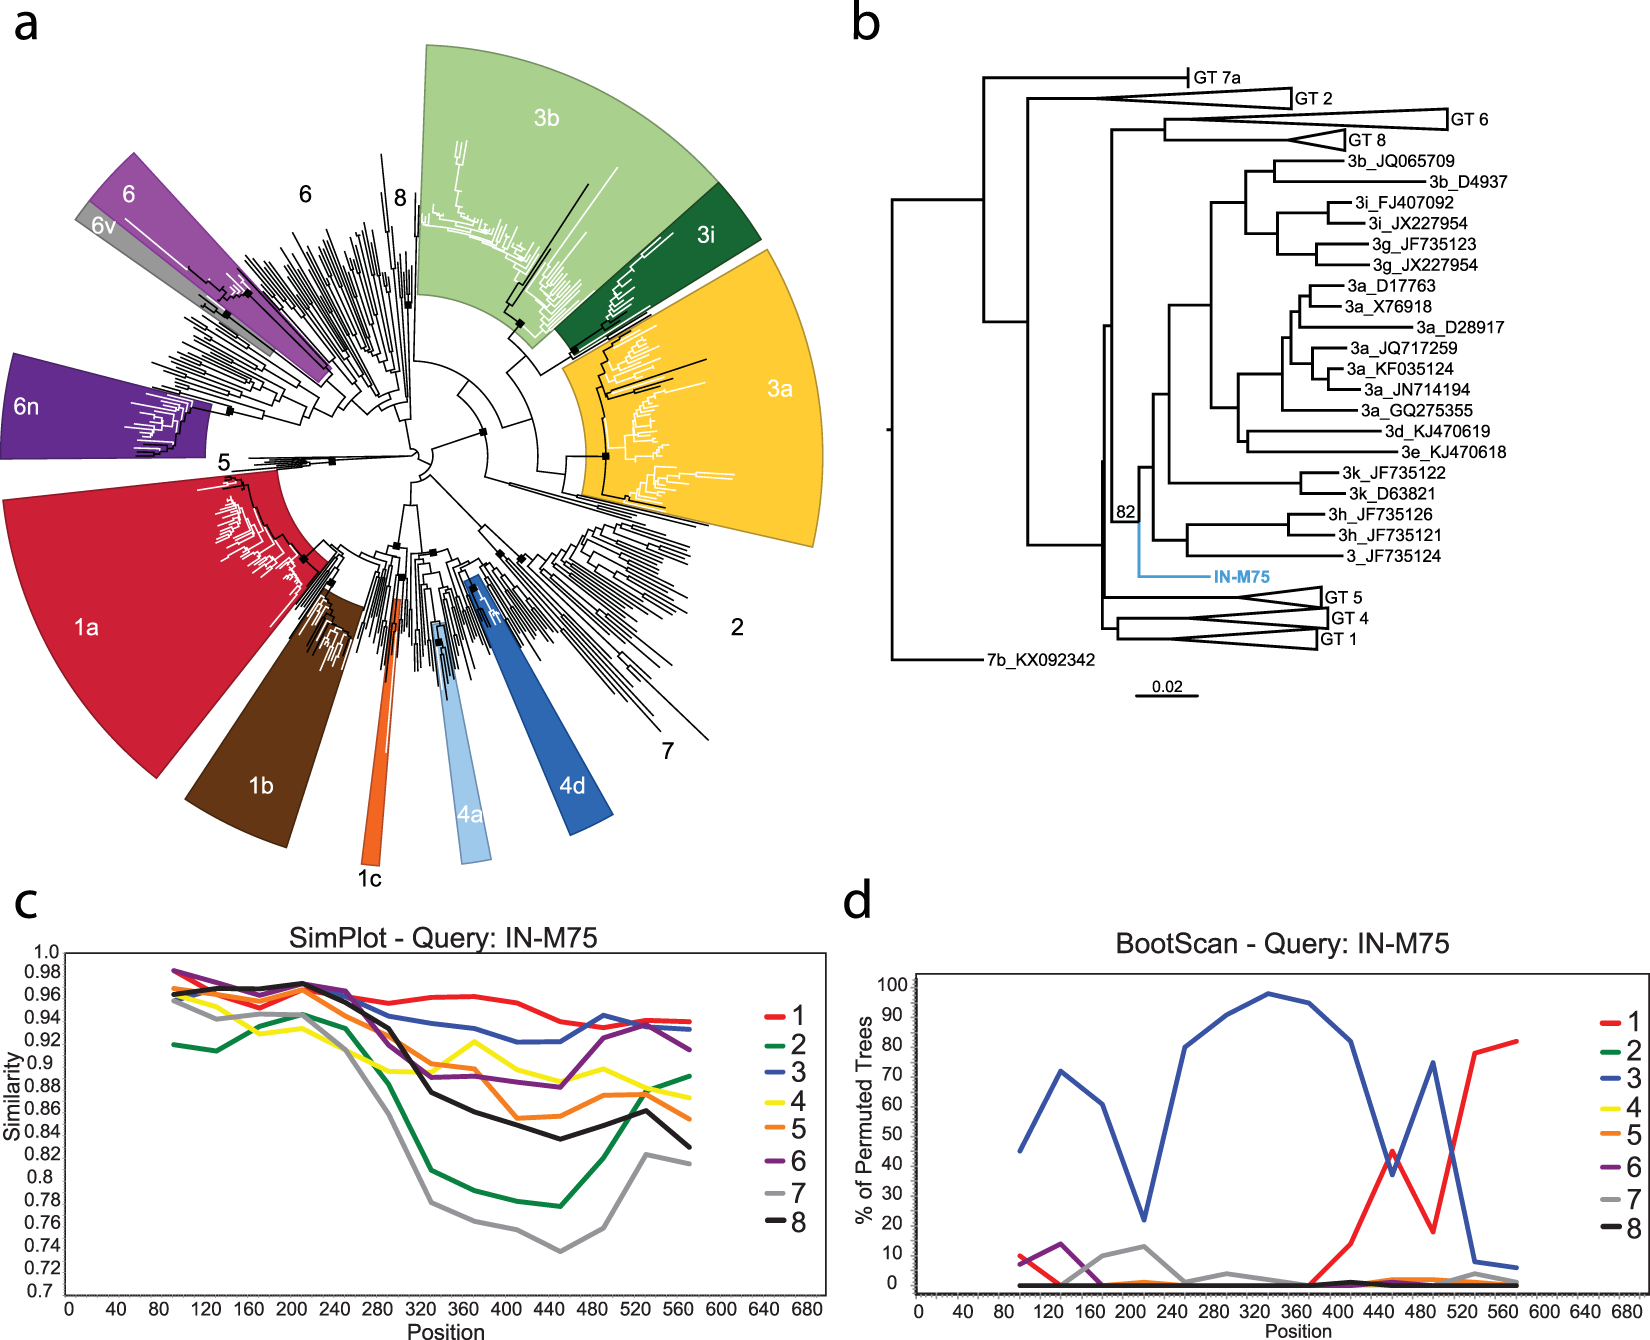 Phylogenetic Approach Reveals That Virus Genotype Largely Determines HIV  Set-Point Viral Load